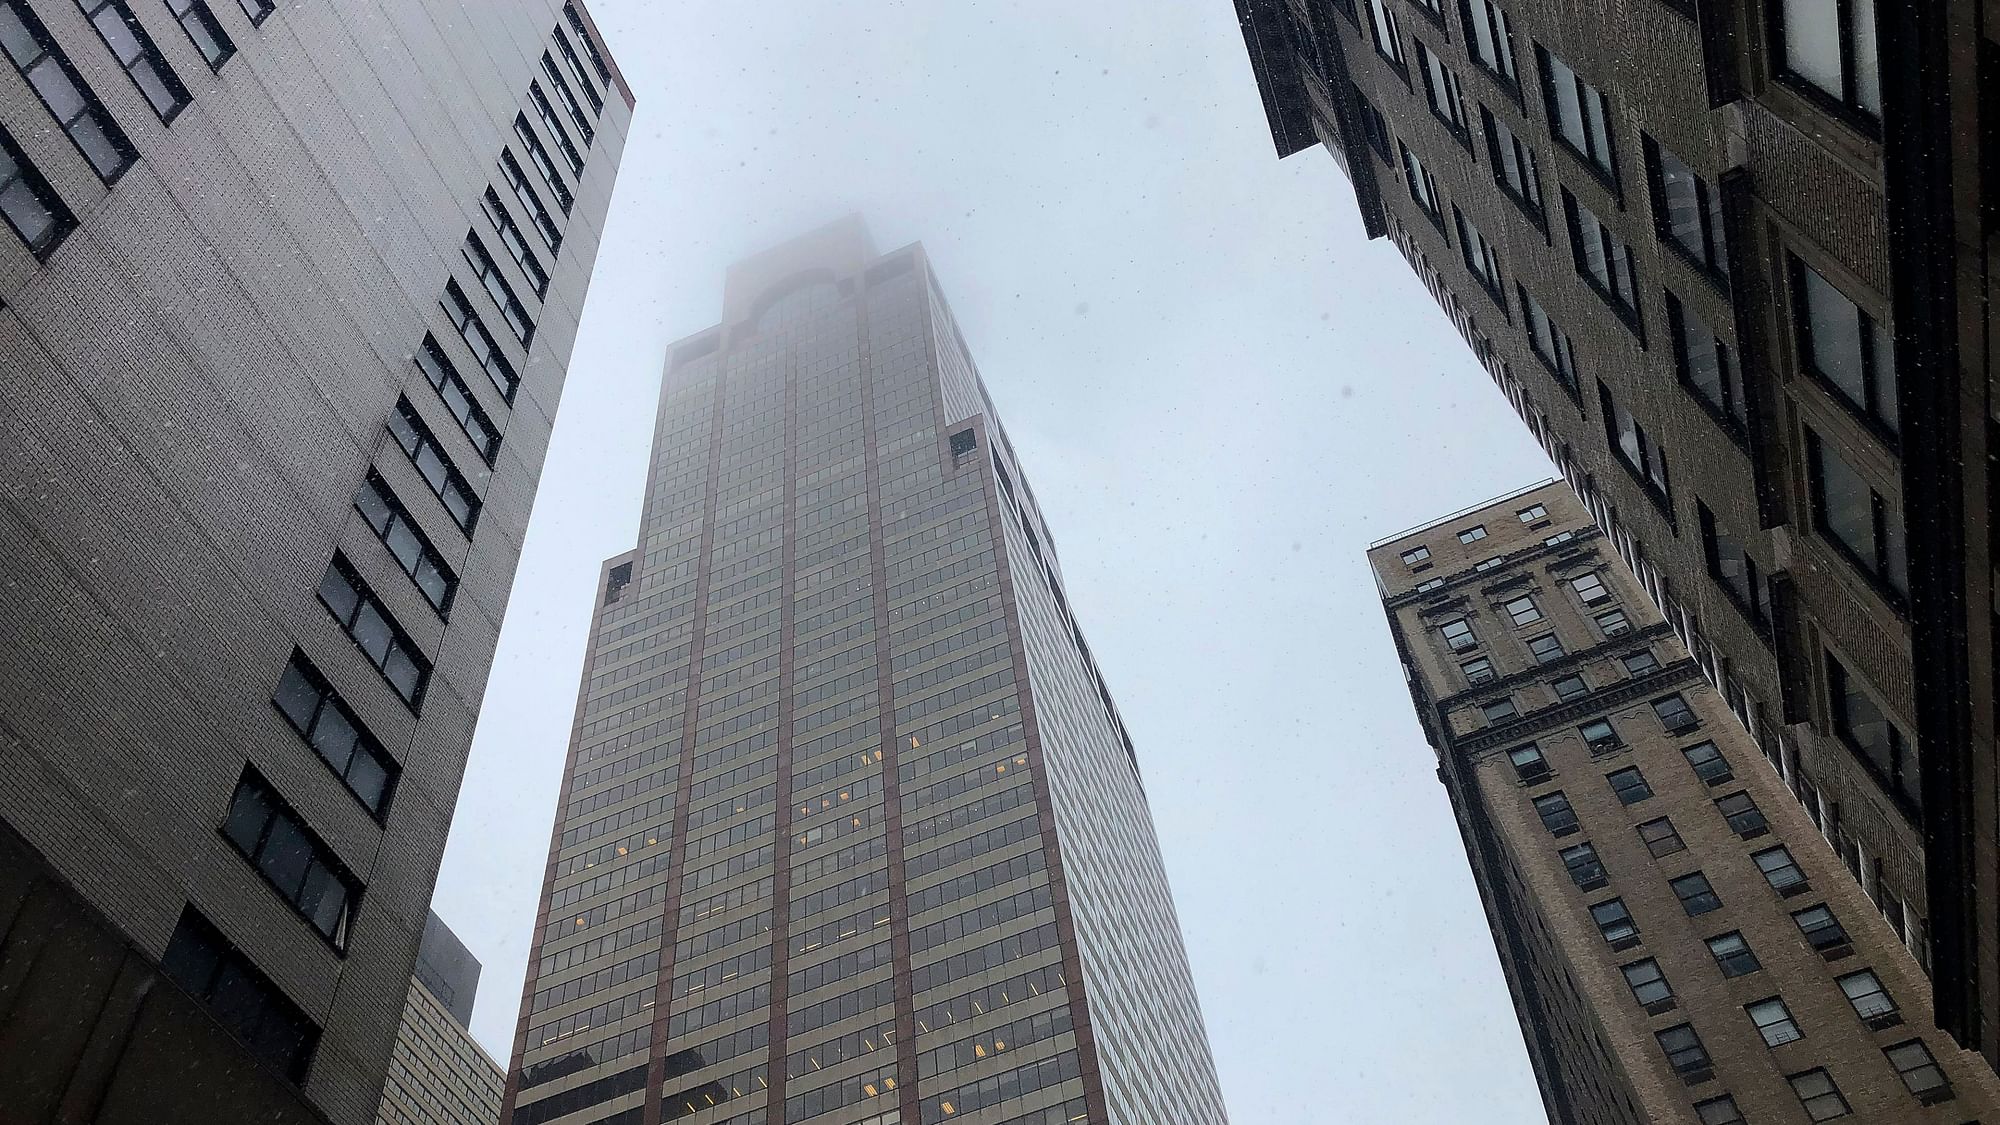 Mist and smoke cover the top of a building near 51st Street and 7th Avenue Monday, June 10, 2019, in New York, where a helicopter was reported to have crash landed on top of the roof of a building in midtown Manhattan.&nbsp;